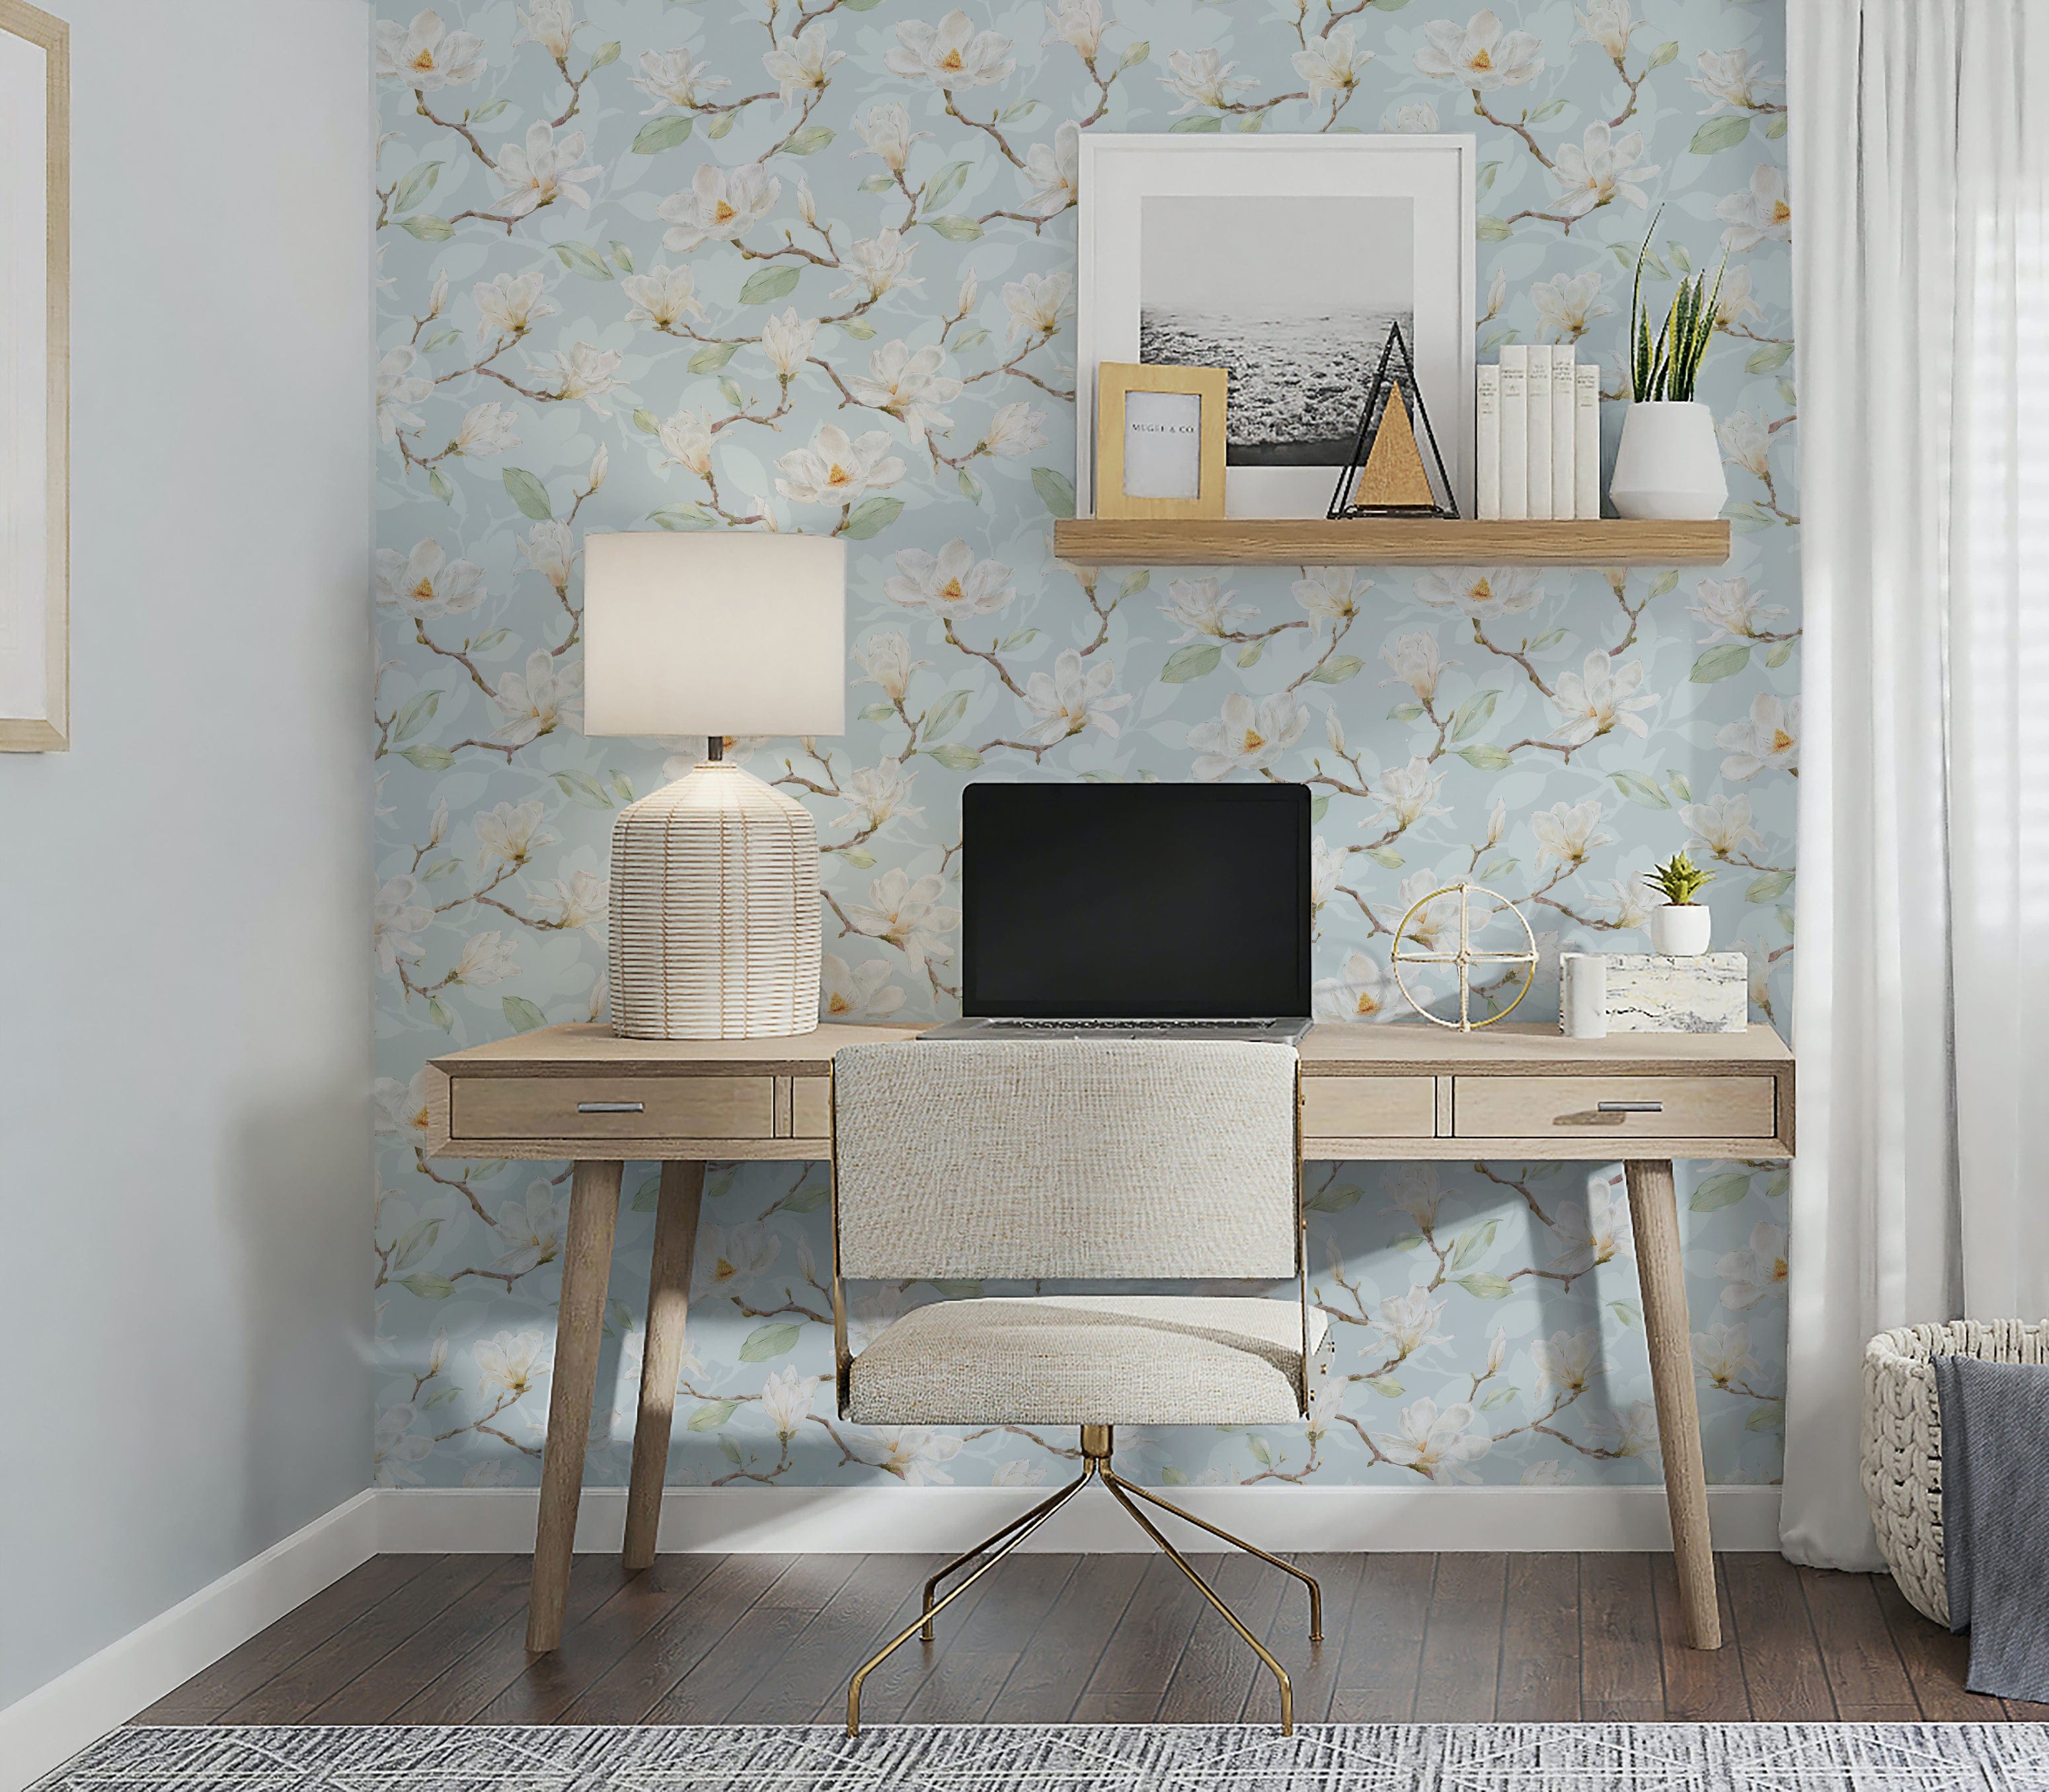 A home office setting with a wall adorned in 'Watercolour Magnolia Wallpaper II', showcasing light blue backdrop with delicate white and pale yellow magnolia blooms and soft green leaves. A wooden desk with a beige upholstered chair, topped with a cream lamp, gives the space a serene and creative atmosphere.